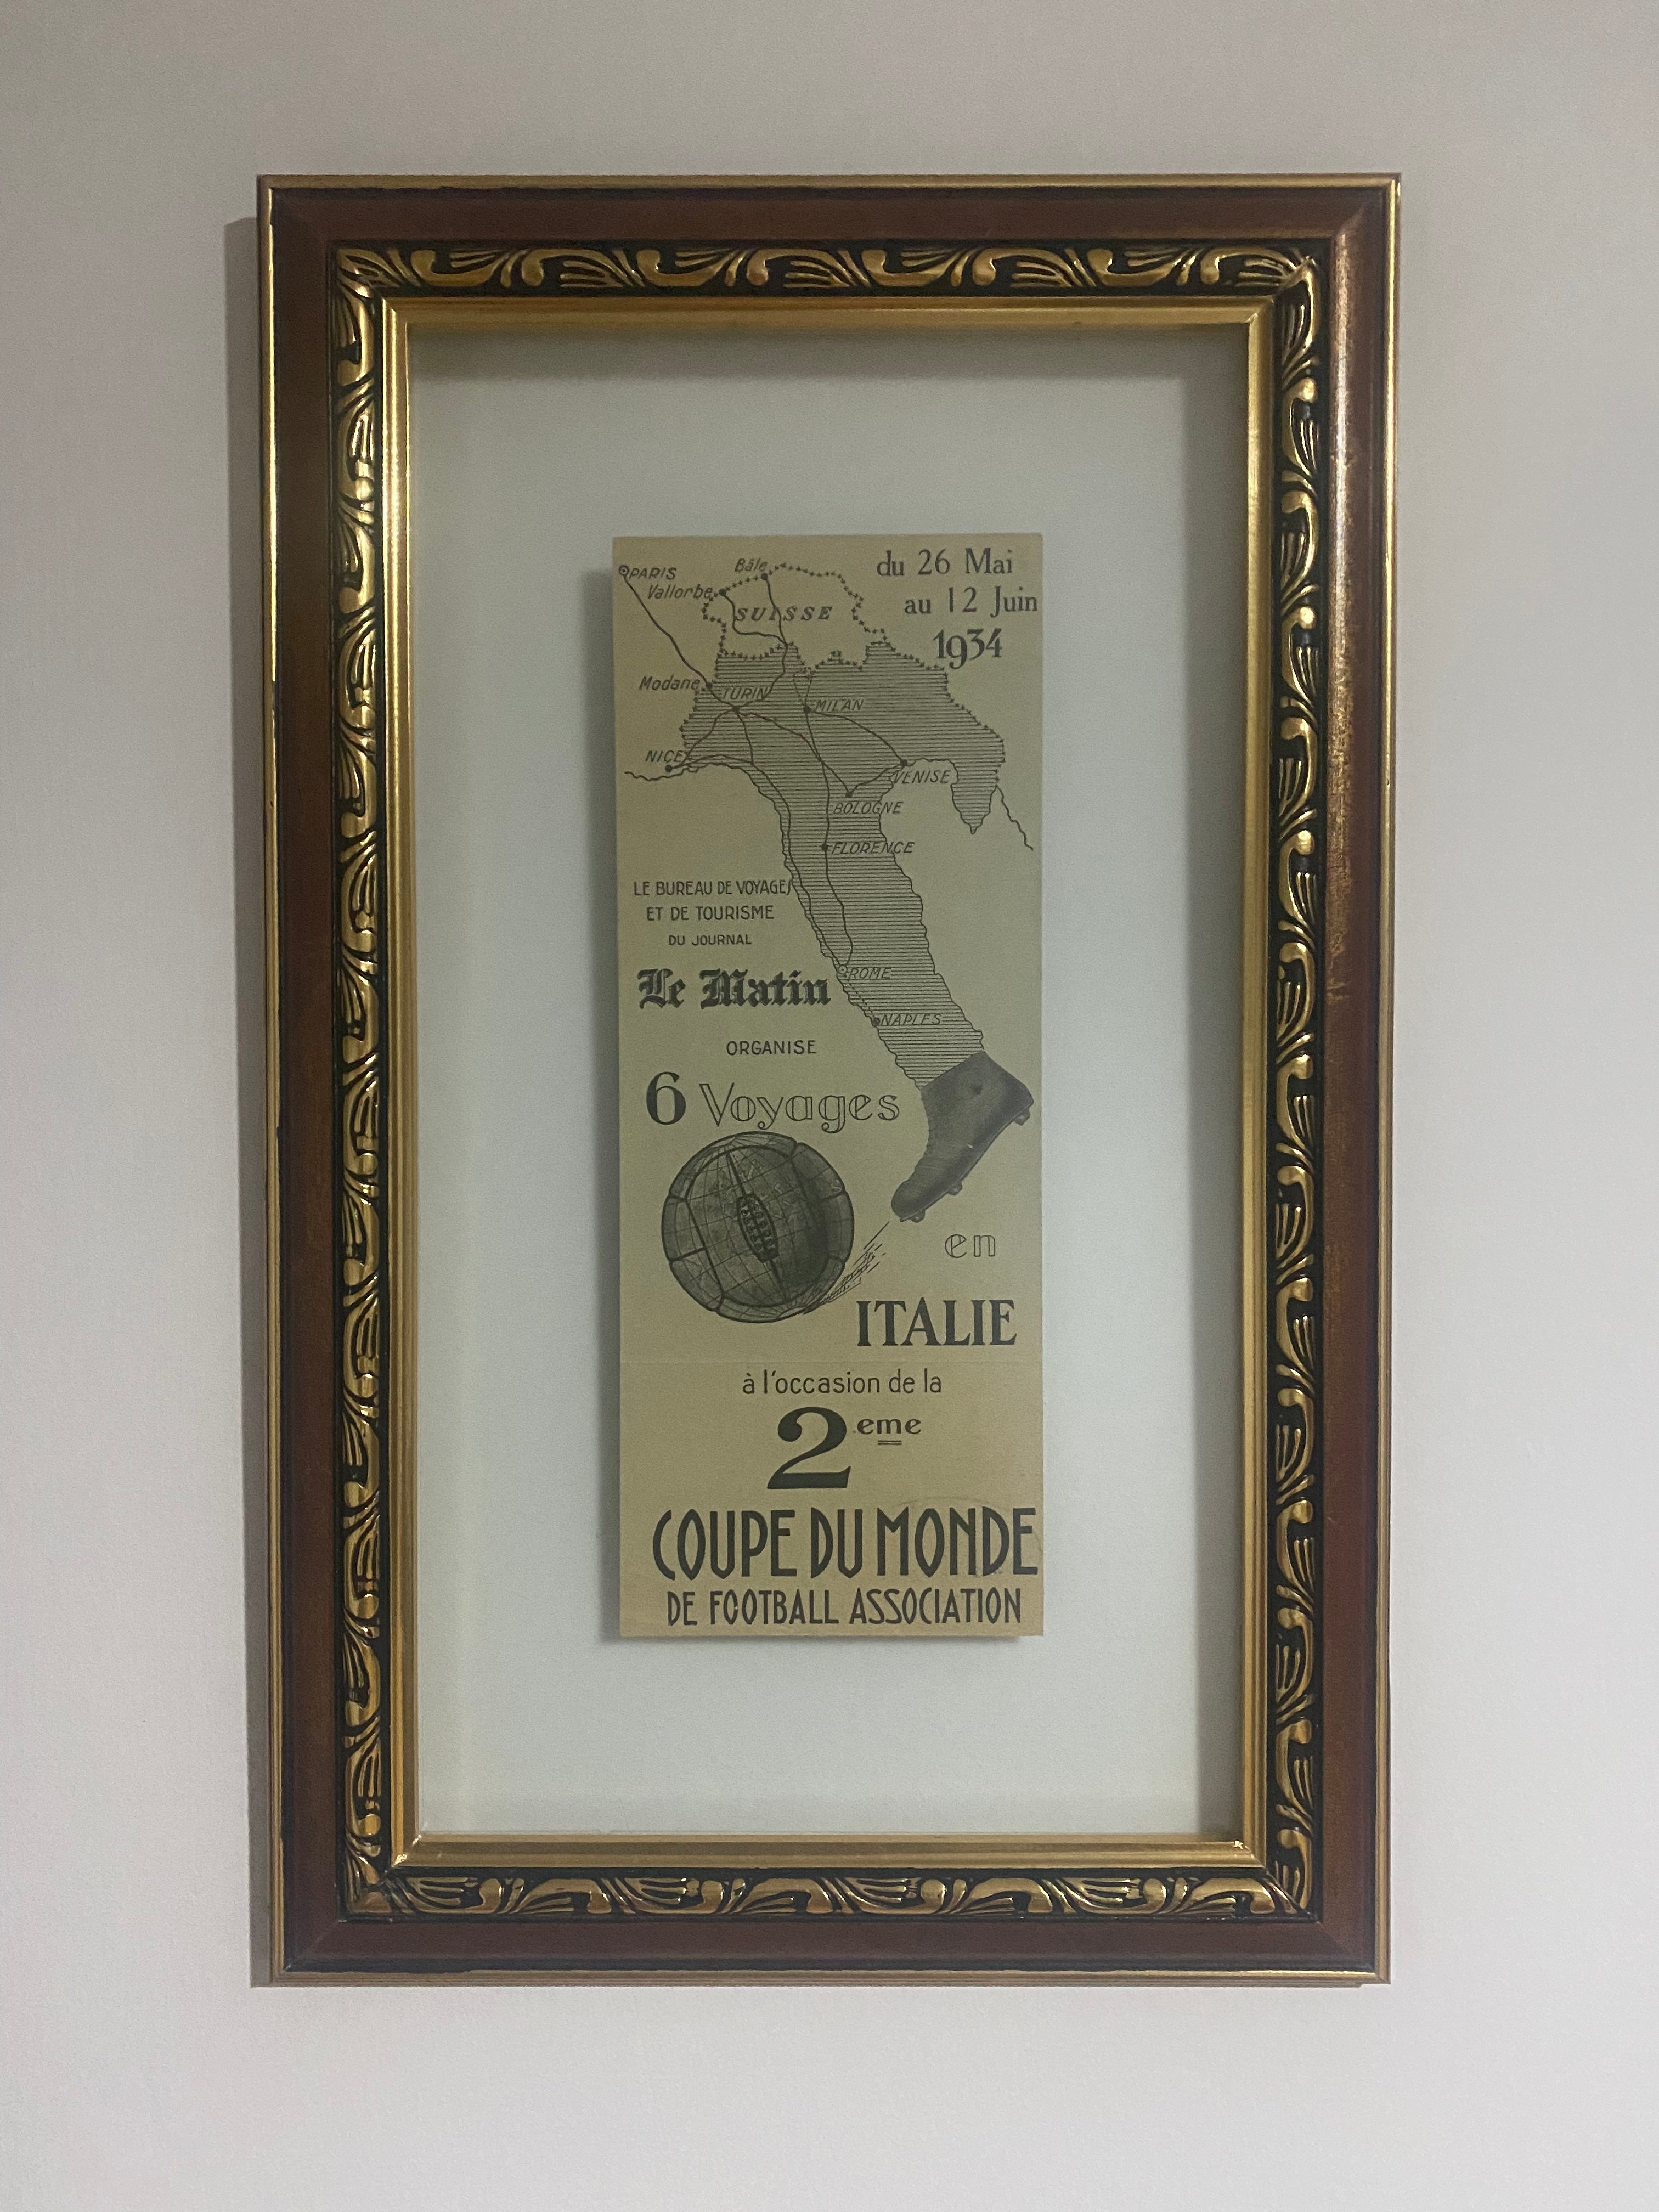 Rare document, travel flyer 2nd FIFA World Cup in Italy on May 26 to June 12, 1934.